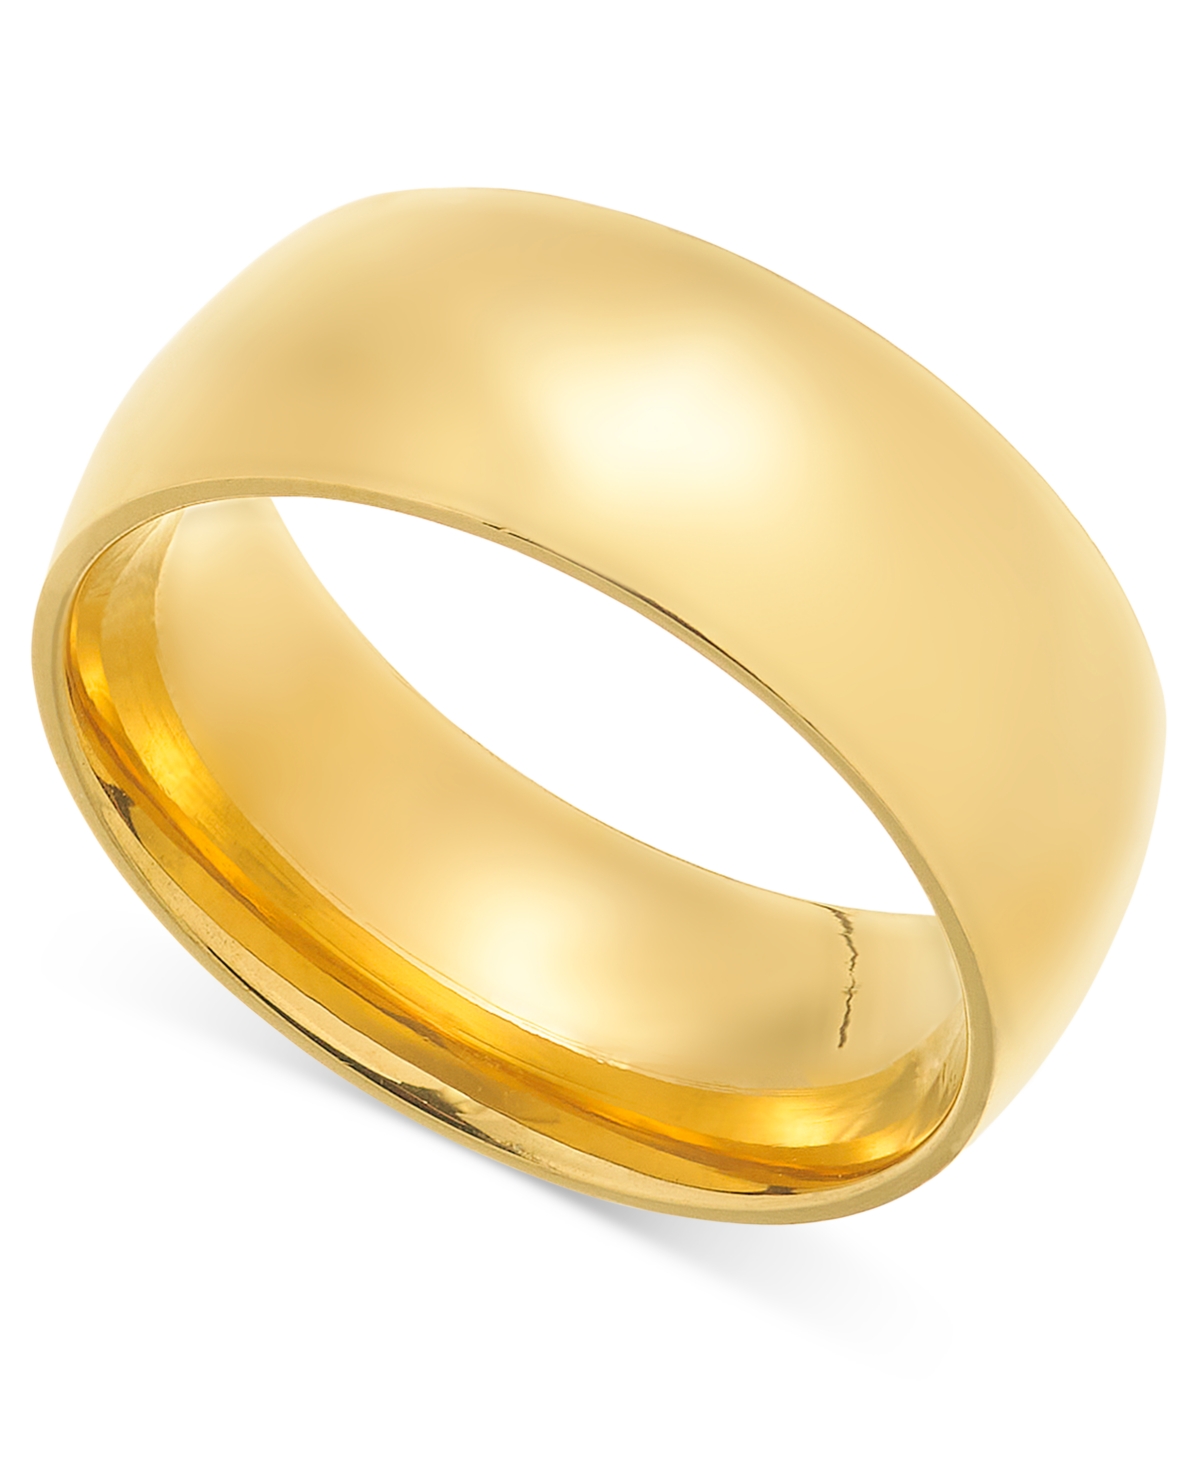 18k Gold-Plated Stainless Steel Cigar Band Yuri Ring - Gold